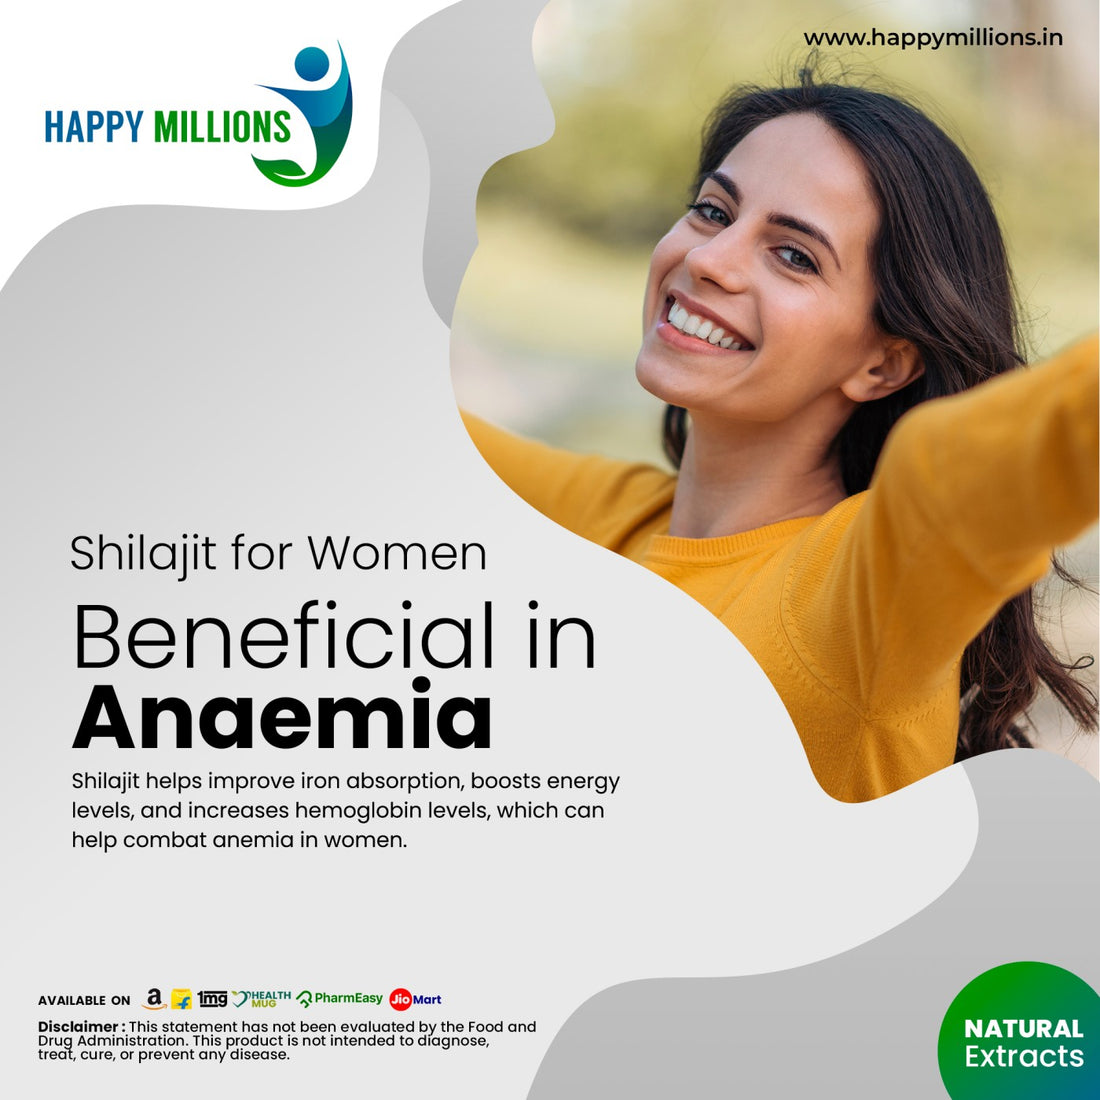 Shilajit for Women — Beneficial in Anemia